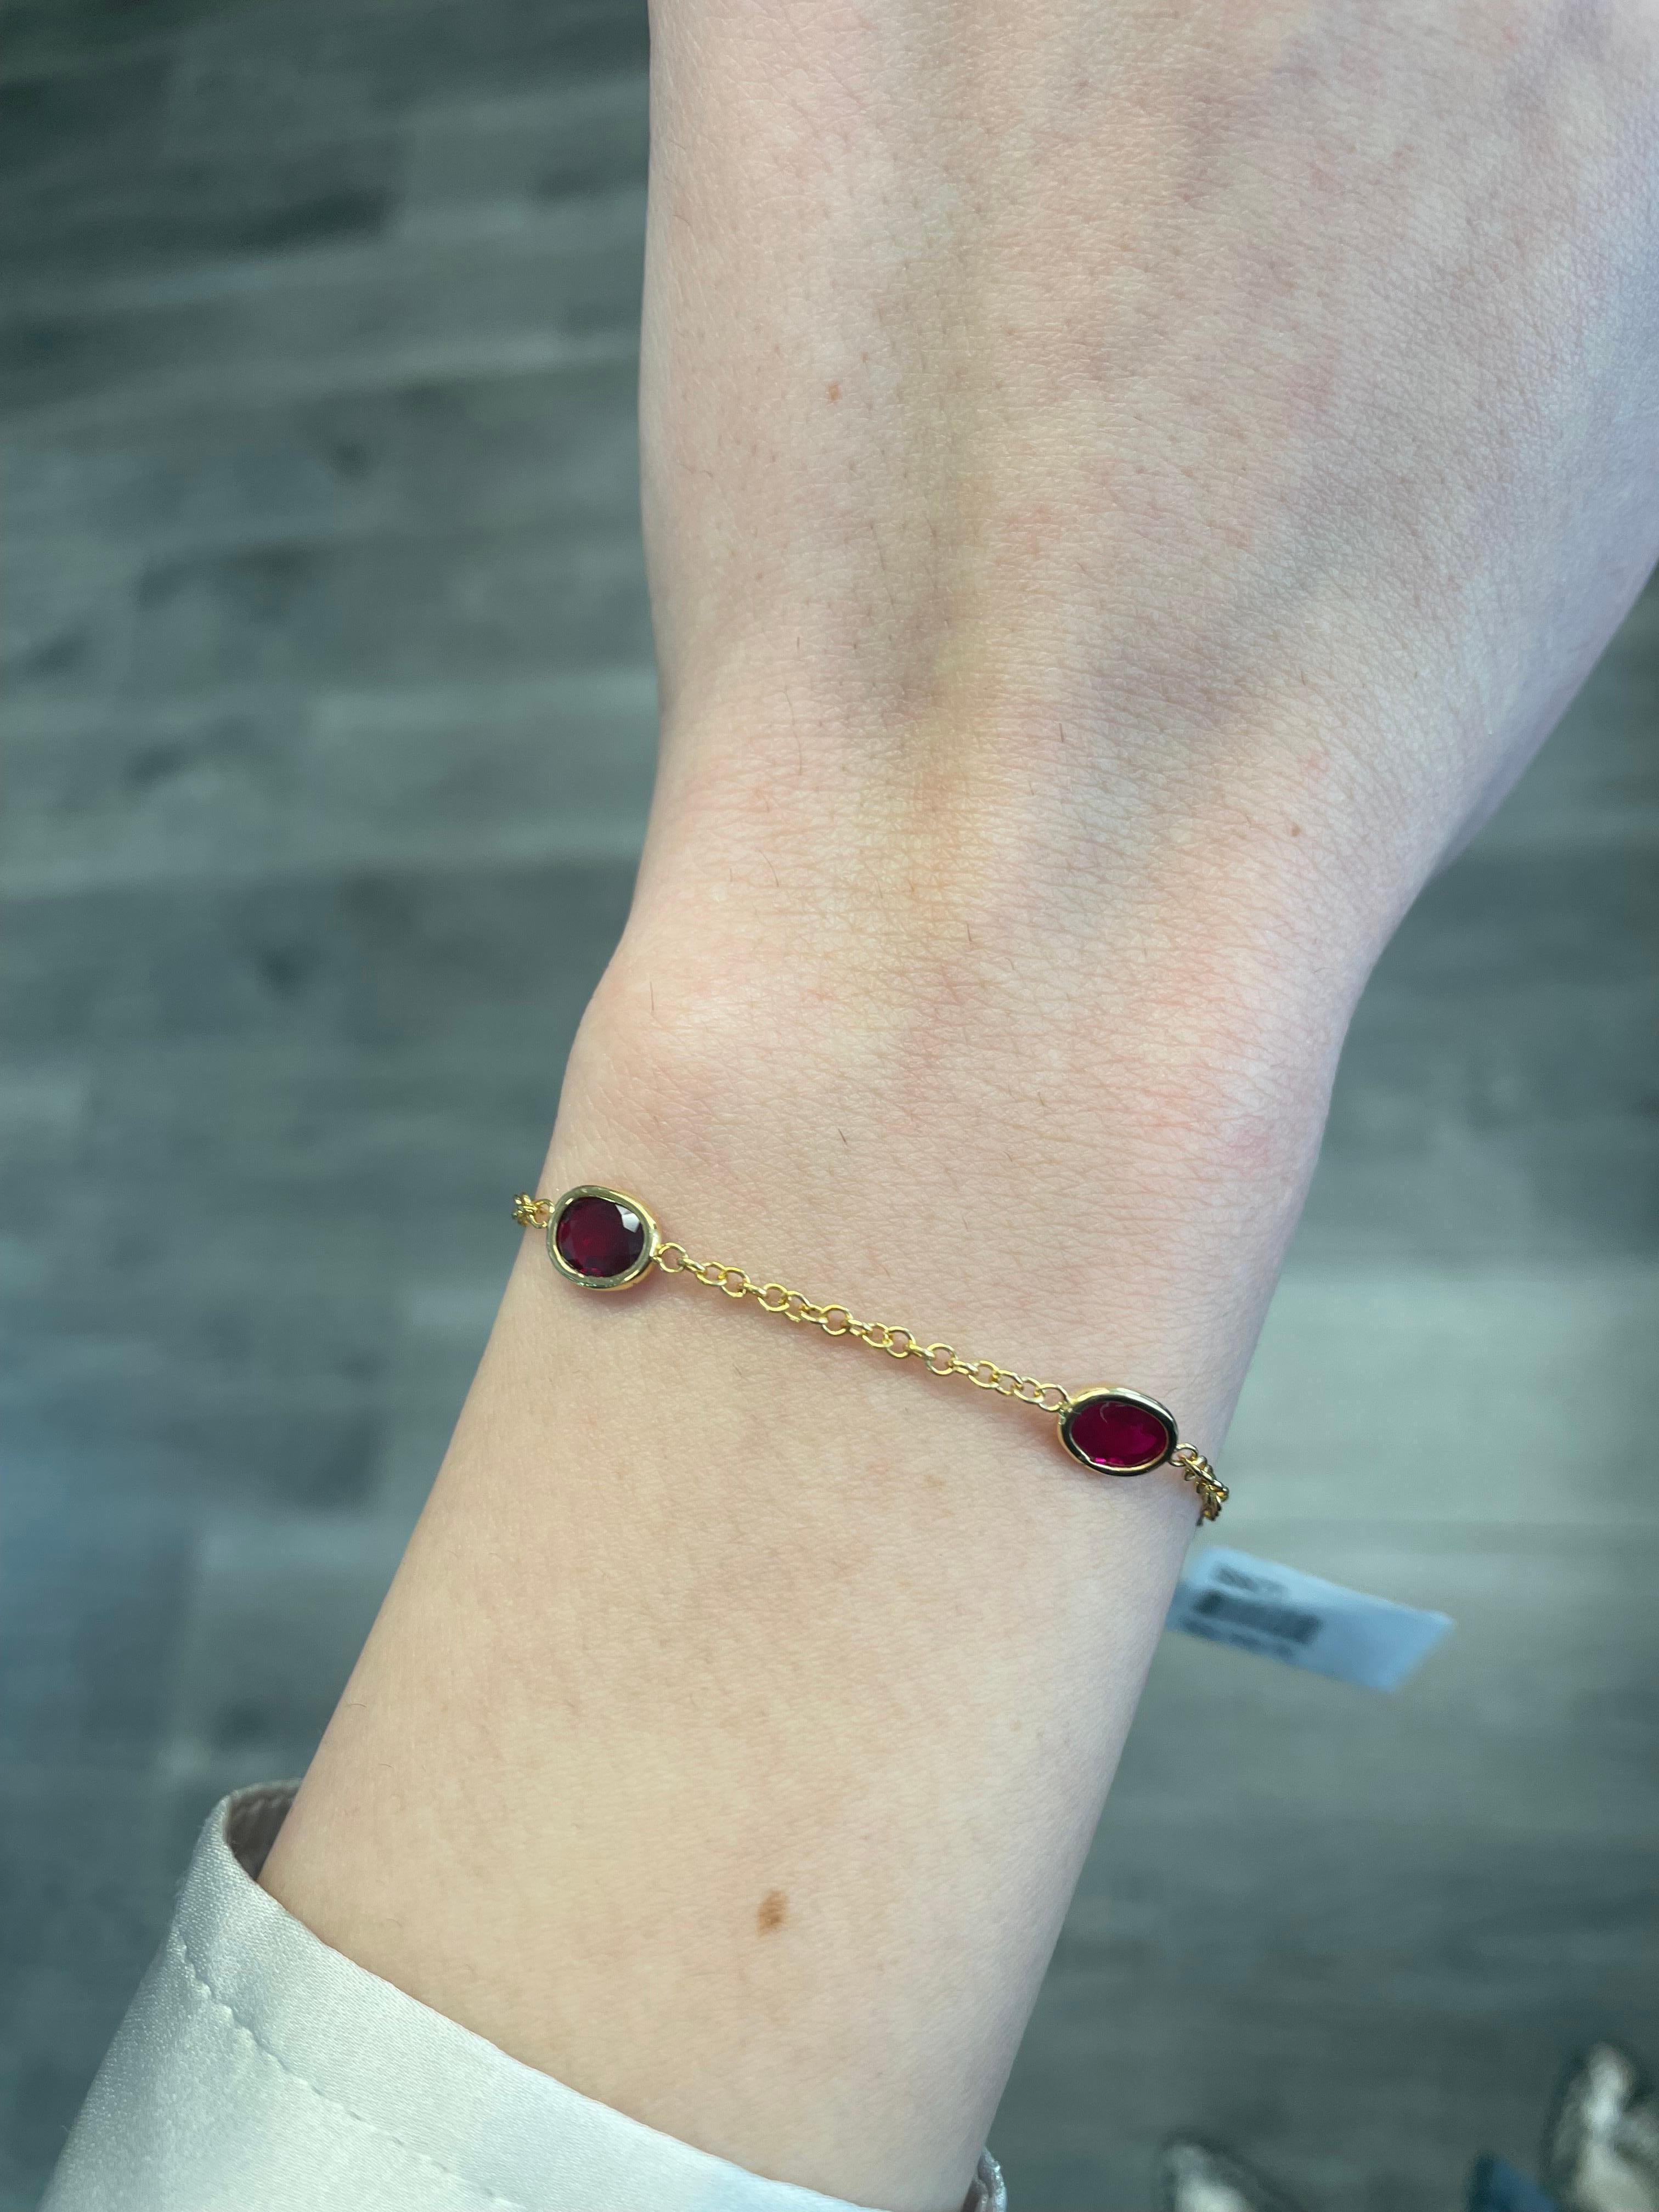 Exquisite ruby by the yard modern bracelet. By Alexander Beverly Hills.
5 oval rubies, 4.35 carats heat. Hand made bezel set in 18k yellow gold. 
Accommodated with an up to date appraisal by a GIA G.G. upon request. please contact us with any